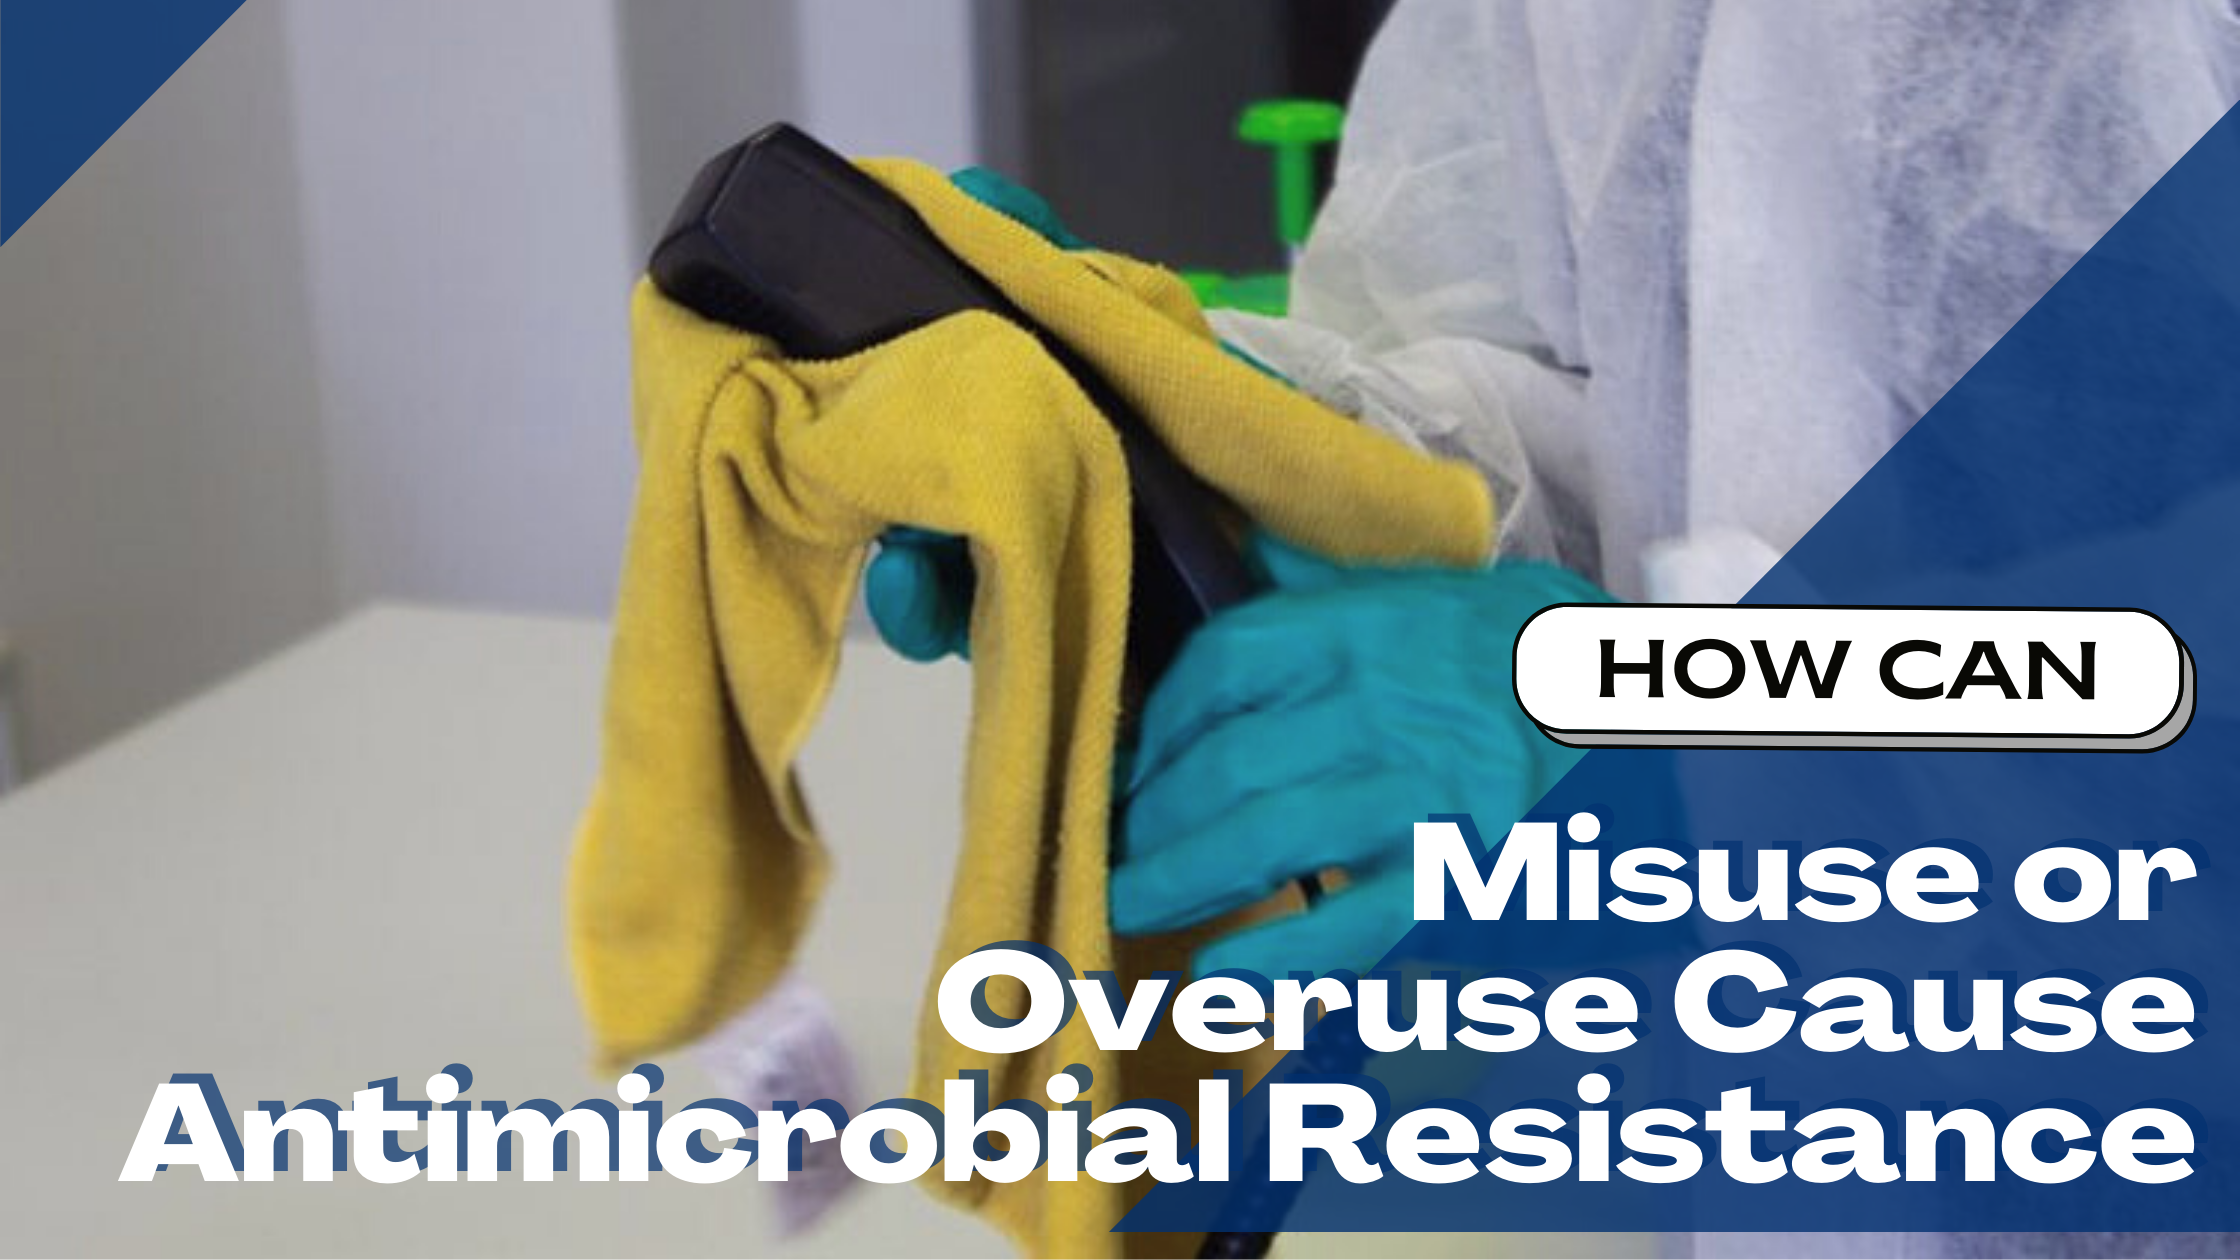 How Can Misuse or Overuse Cause Antimicrobial Resistance